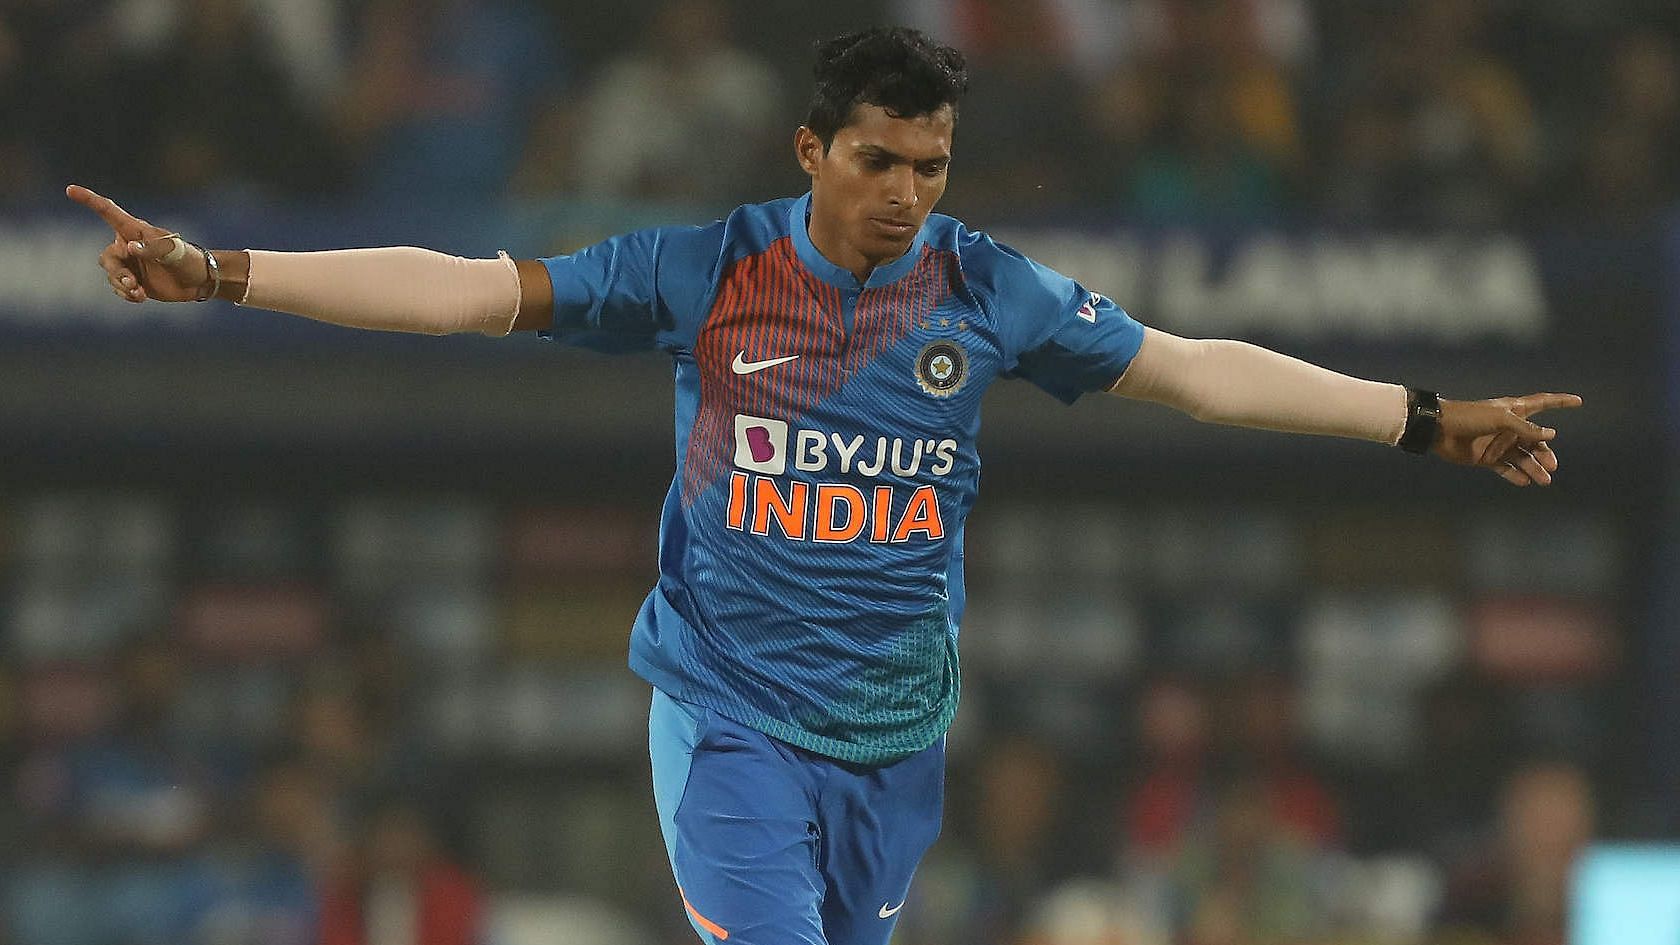 Navdeep Saini was adjudged as the man-of-the-series as India beat Sri Lanka in the third T20I in Pune on Friday.